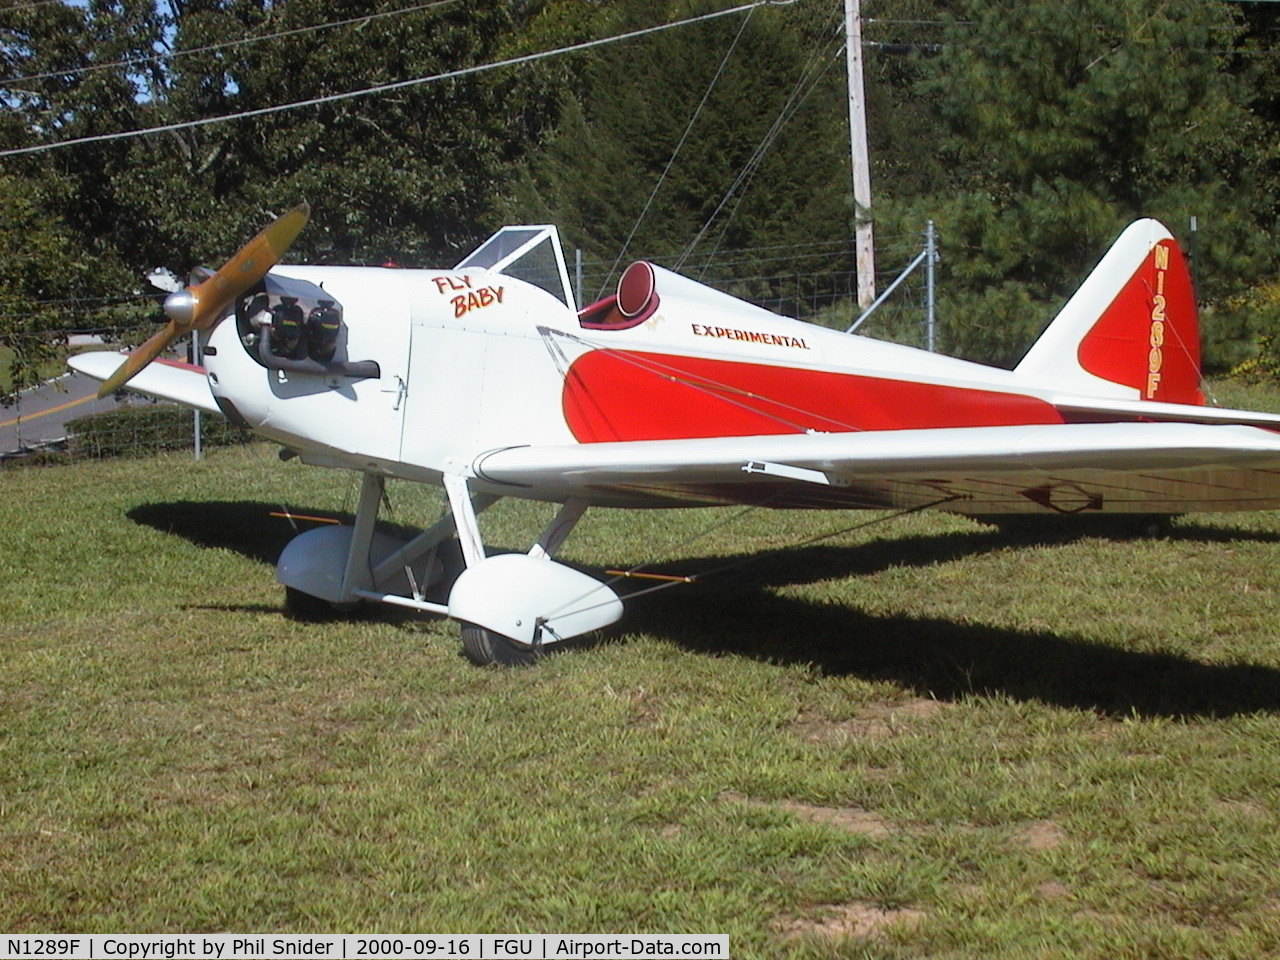 N1289F, 1976 Bowers Fly Baby 1A C/N 564, Collegedale TN airport.